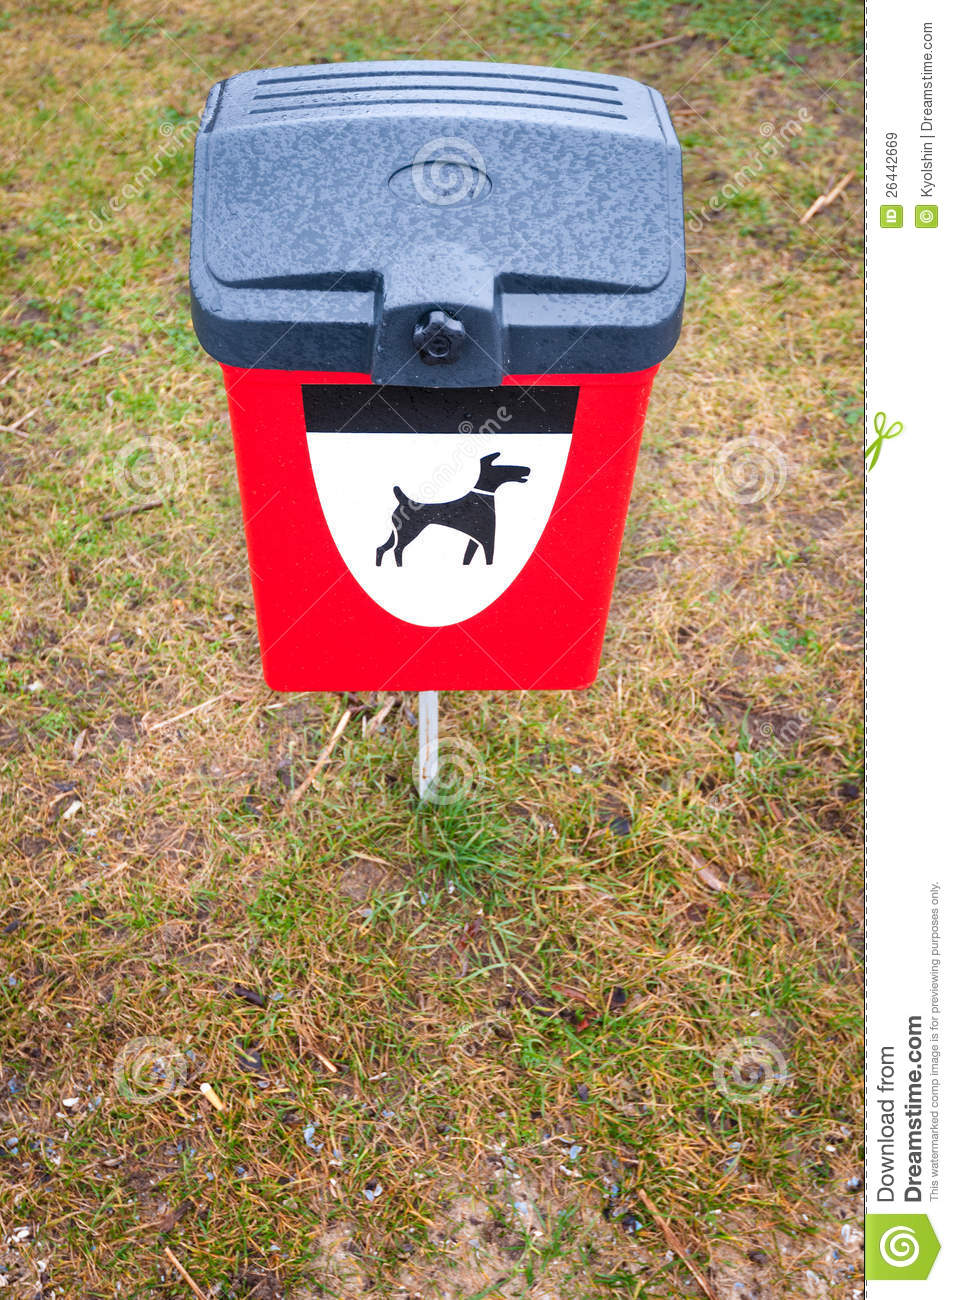 Black And White Dog Symbol On It  Bright Red Box For Animals Waste